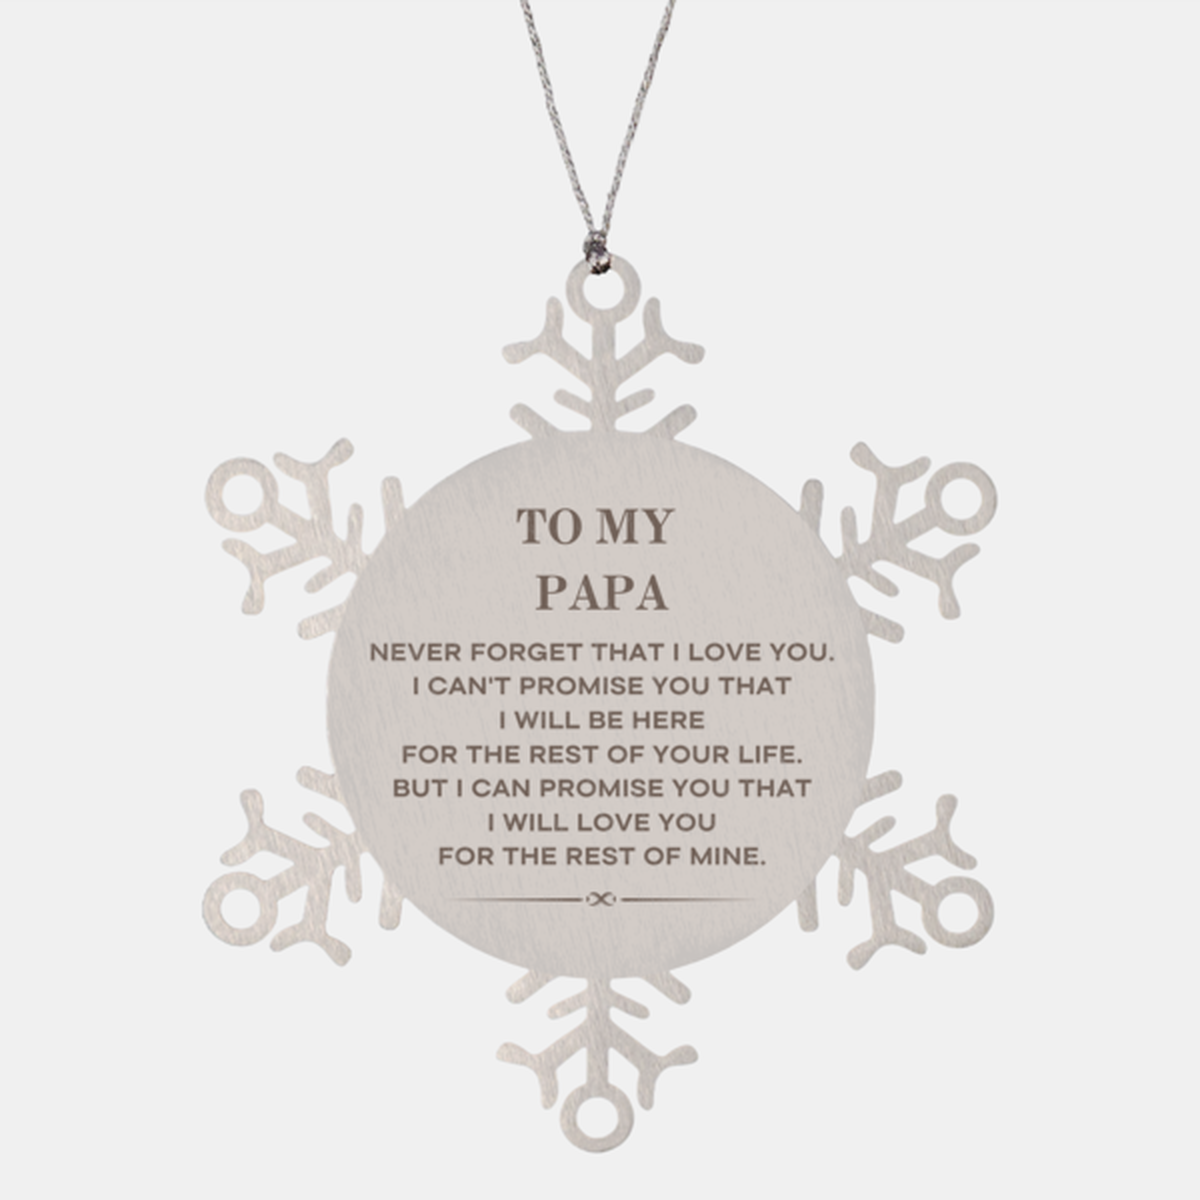 To My Papa Gifts, I will love you for the rest of mine, Love Papa Ornament, Birthday Christmas Unique Snowflake Ornament For Papa